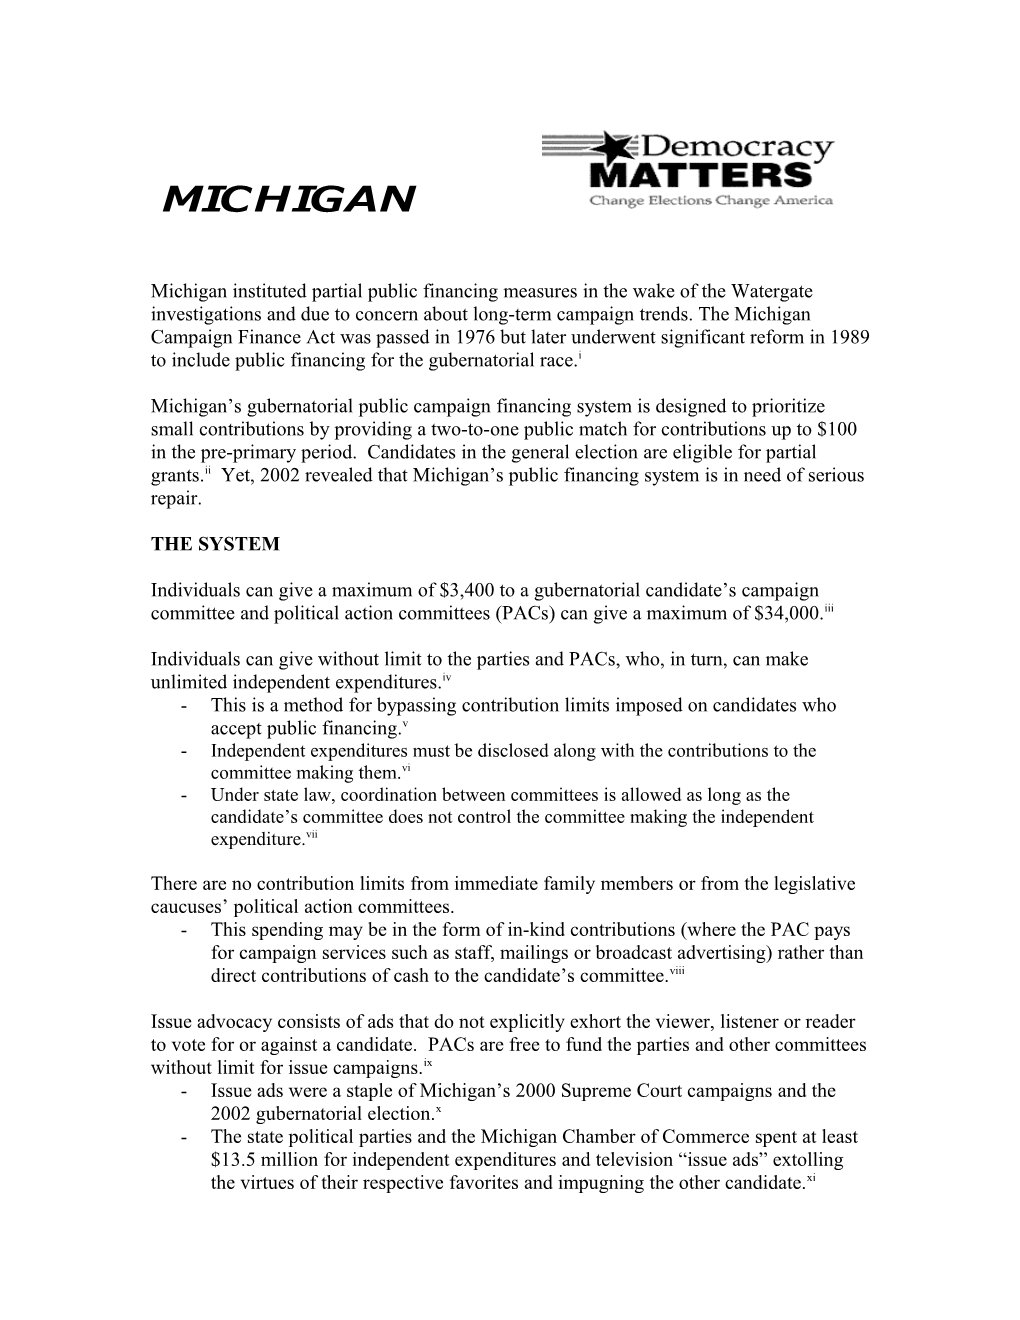 Michigan Instituted Partial Public Financing Measures in the Wake of the Watergate